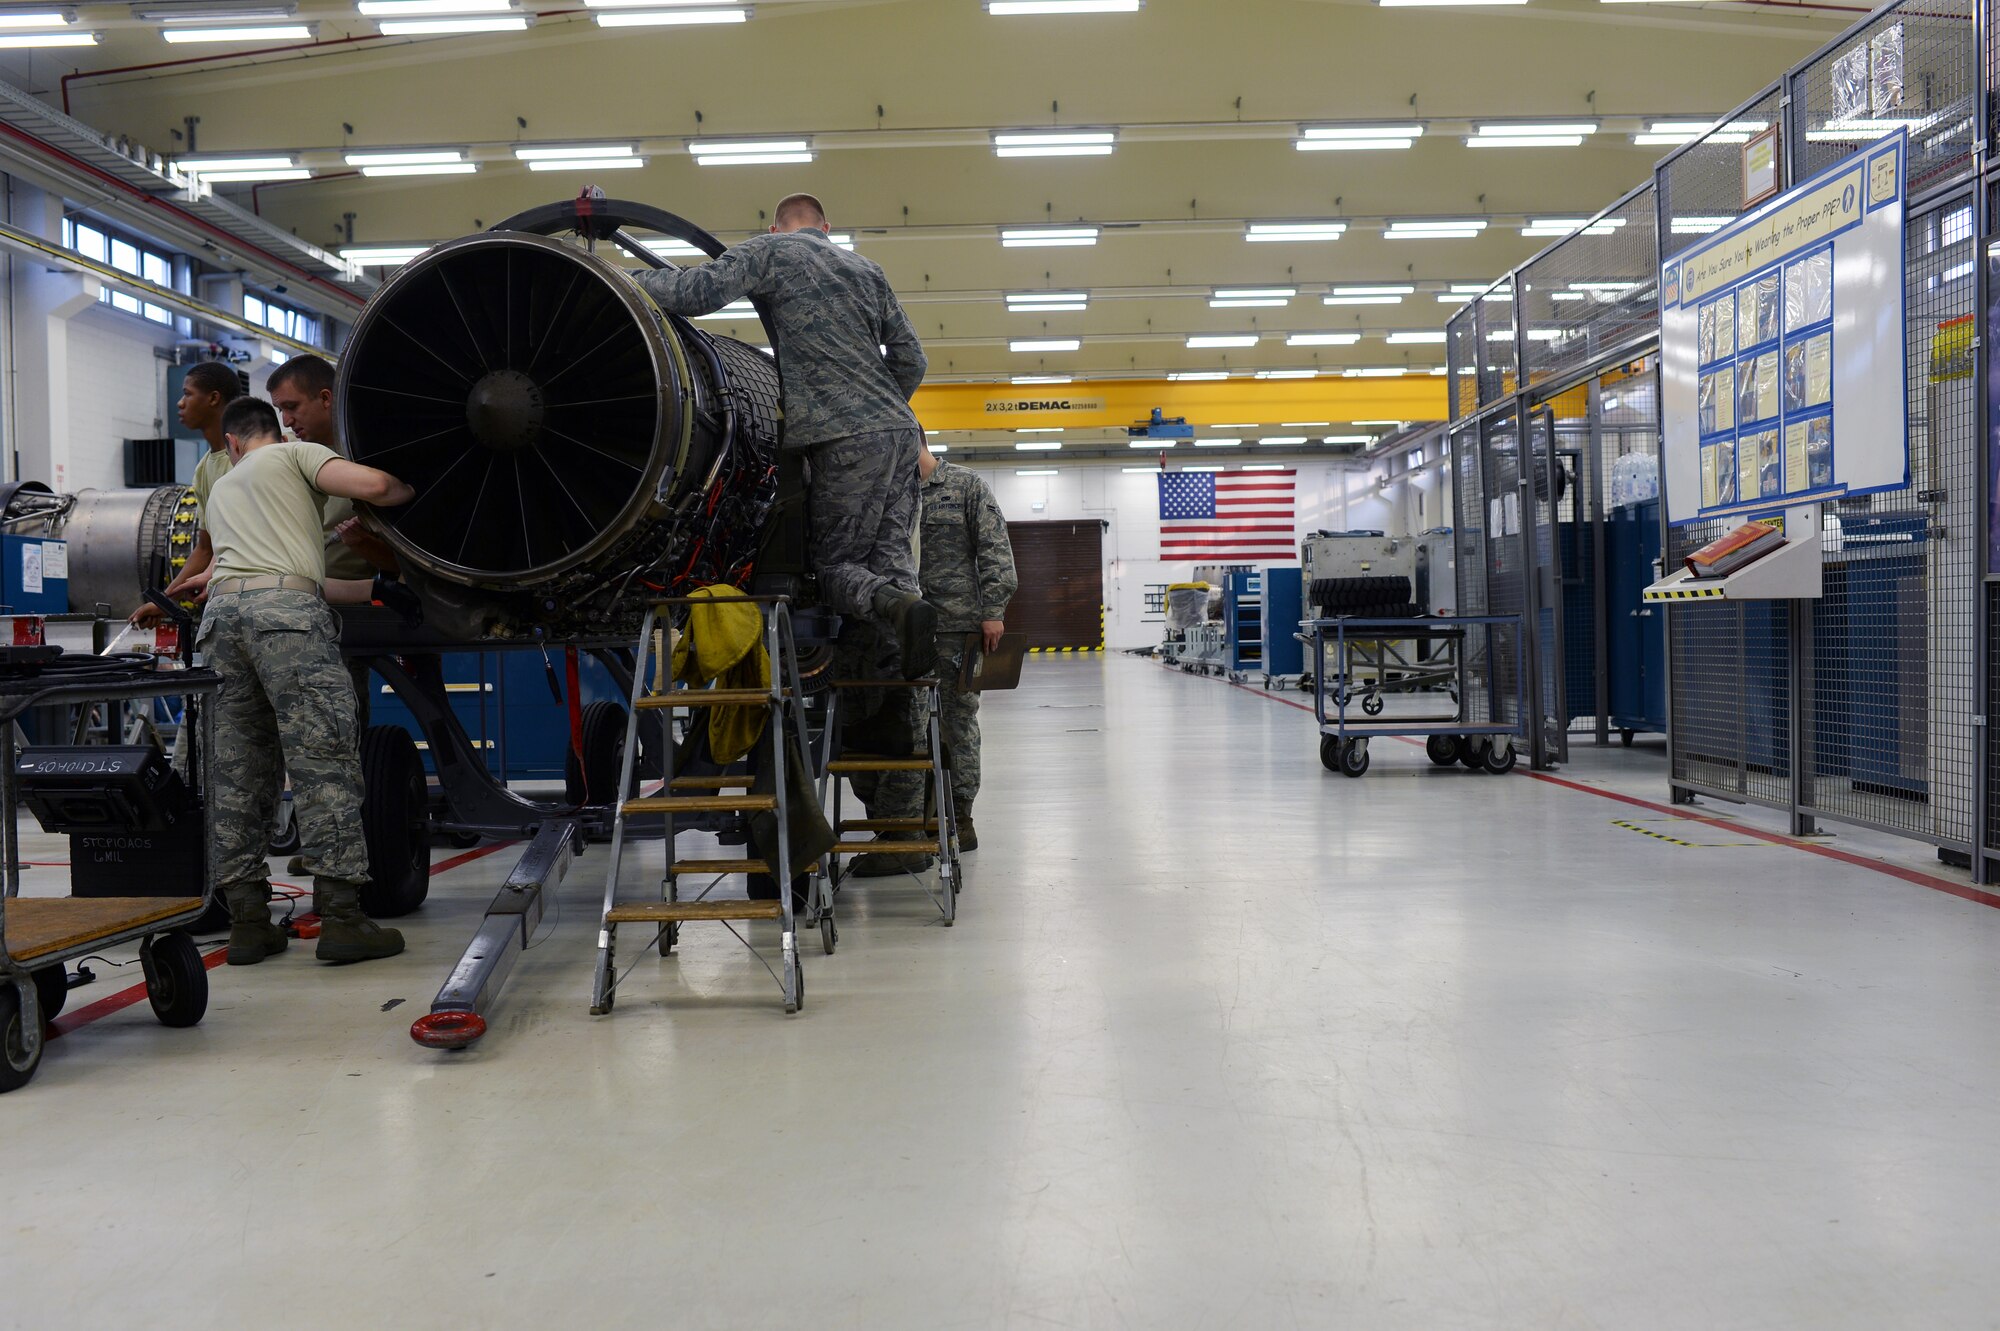 52nd Component Maintenance Squadron aerospace propulsion technicians work on a jet engine component in the propulsion shop at Spangdahlem Air Base, Germany, Sept. 9, 2014. The 52nd CMS propulsion shop fixes, recalibrates and inspects all mechanical parts to ensure they work properly. (U.S. Air Force photo by Airman 1st Class Timothy Kim/Released)